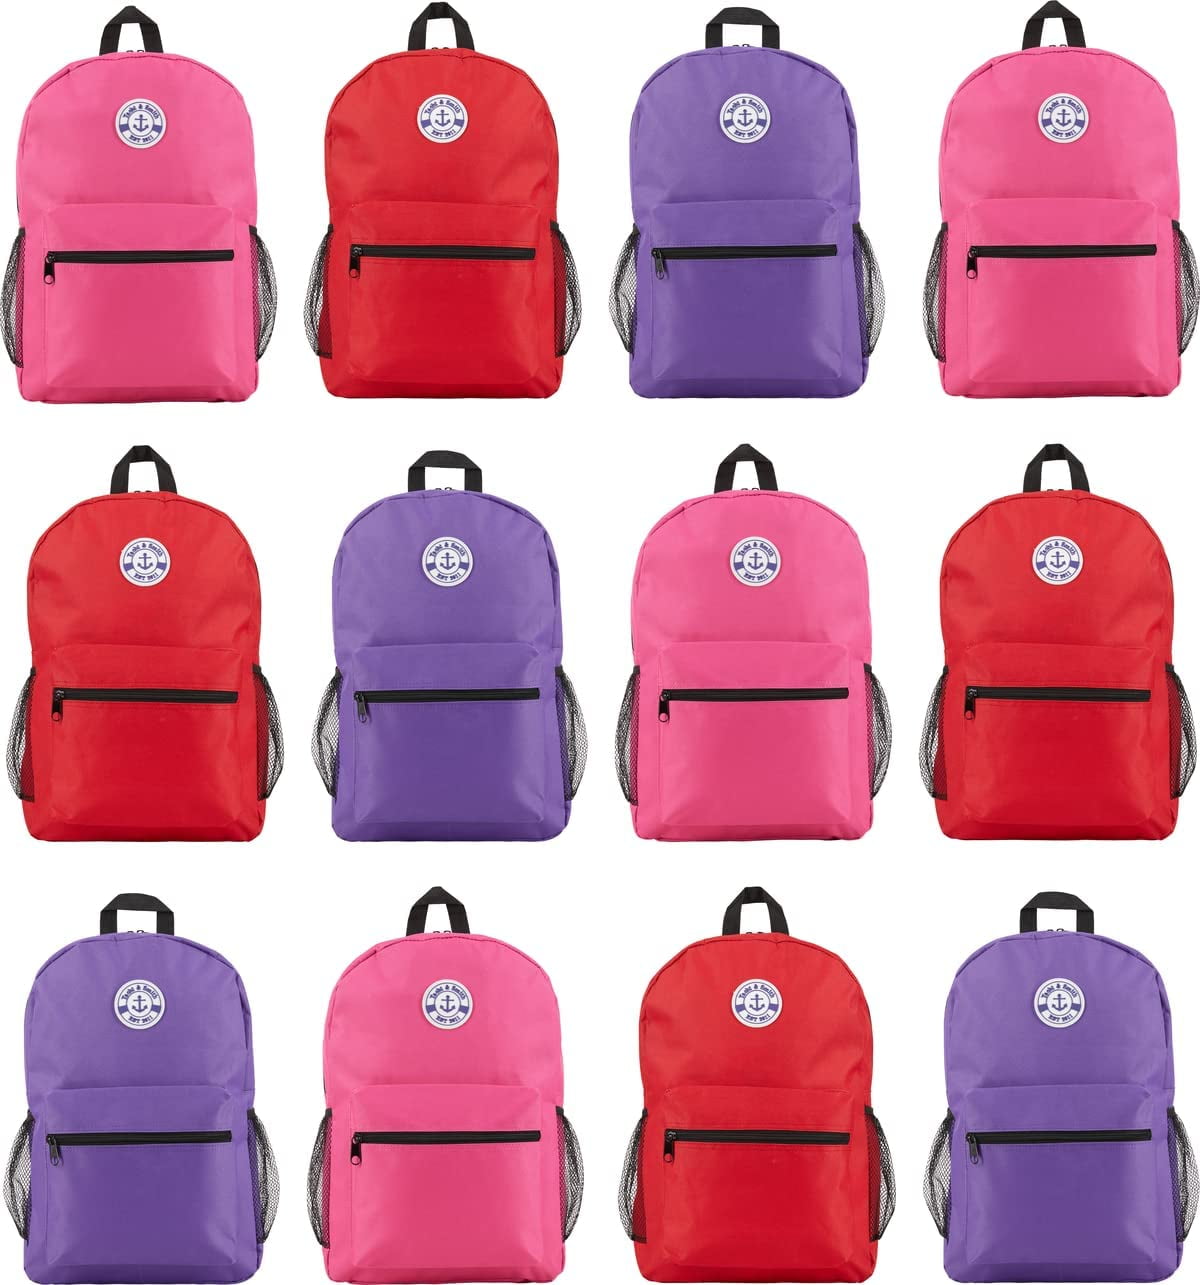 Wholesale Kids Backpacks School - Neon Colored Straw Backpack for Children